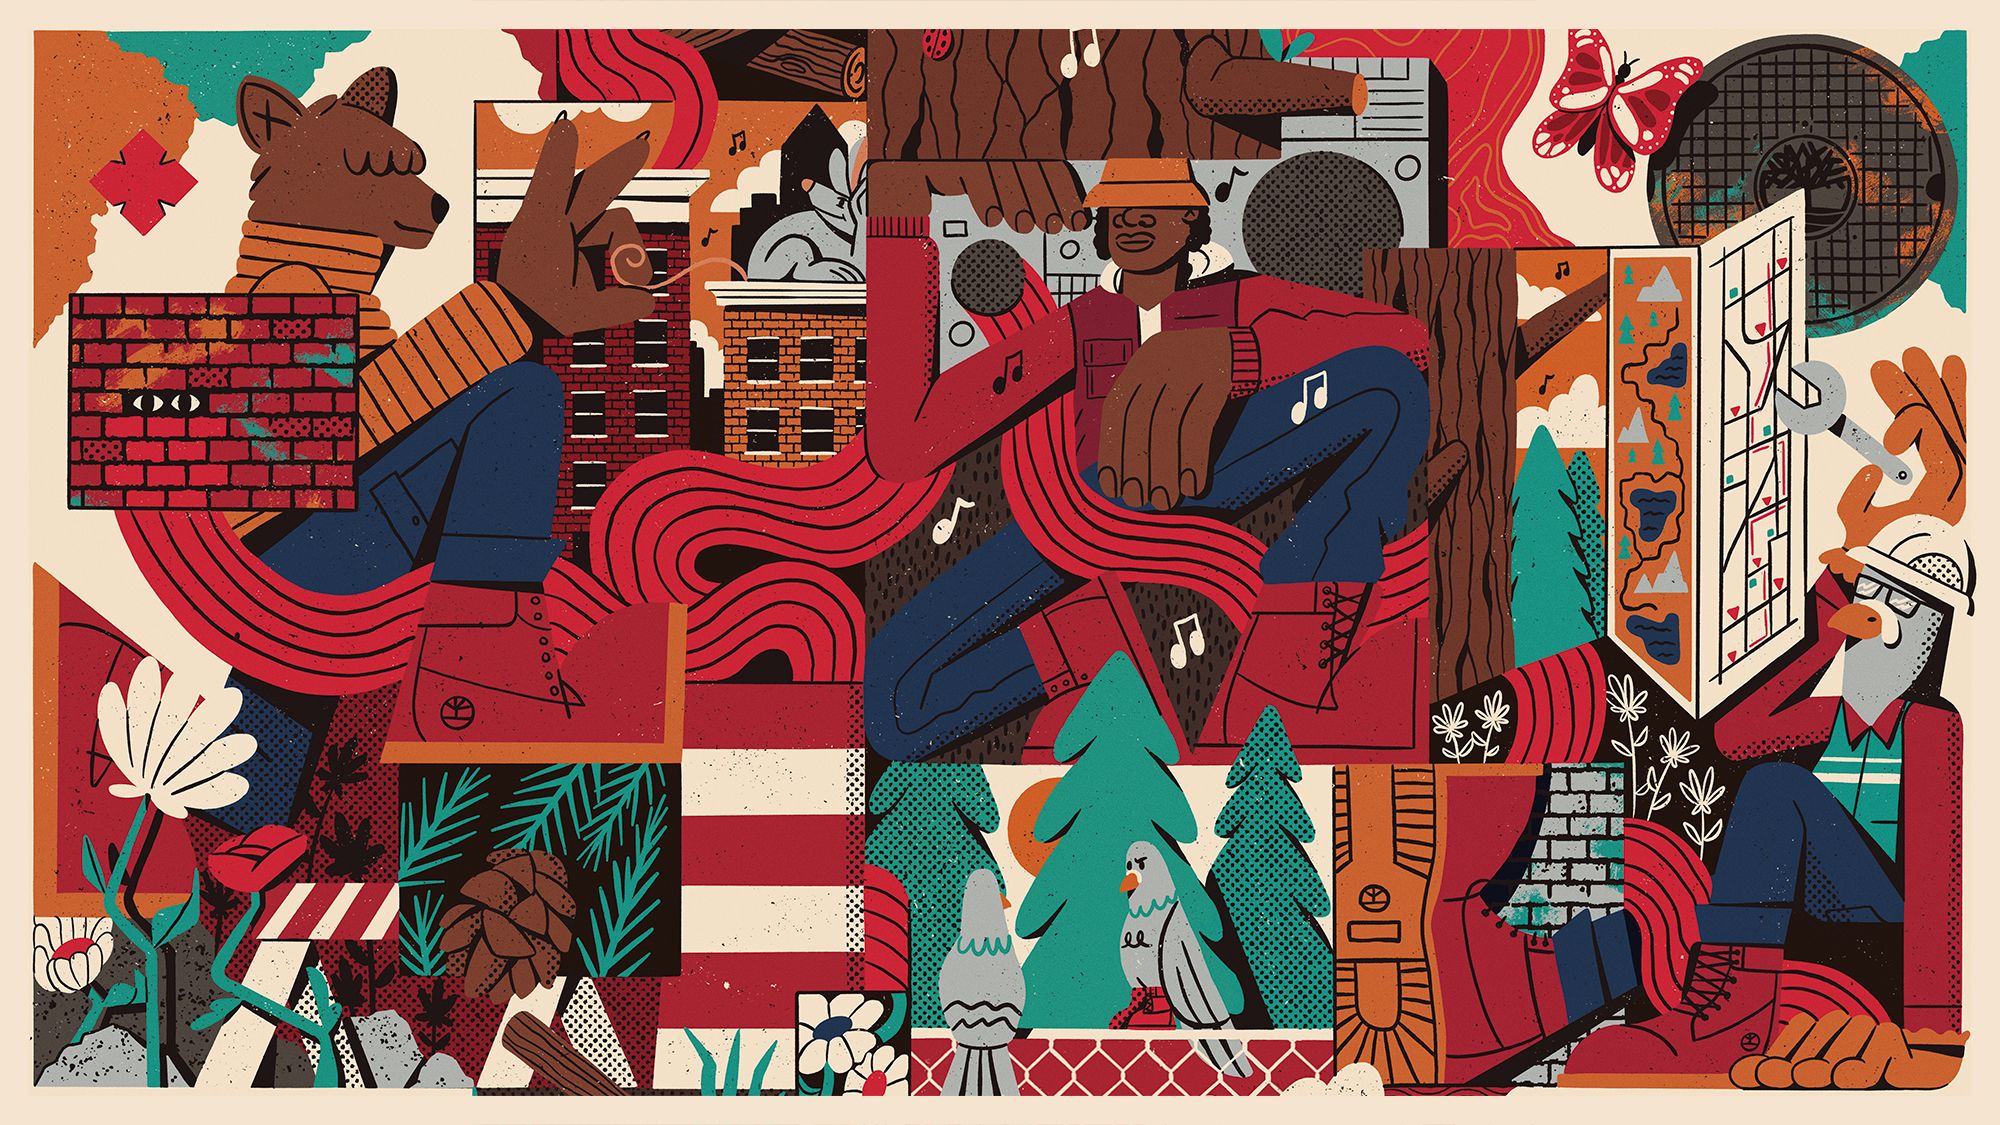 illustration with bear wearing sweater and aura orange Timberland boots, weaving lines, brick buildings with a rat on top, music notes, a man in timberland boots and a bucket hat, evergreen trees, birds, pine cones.